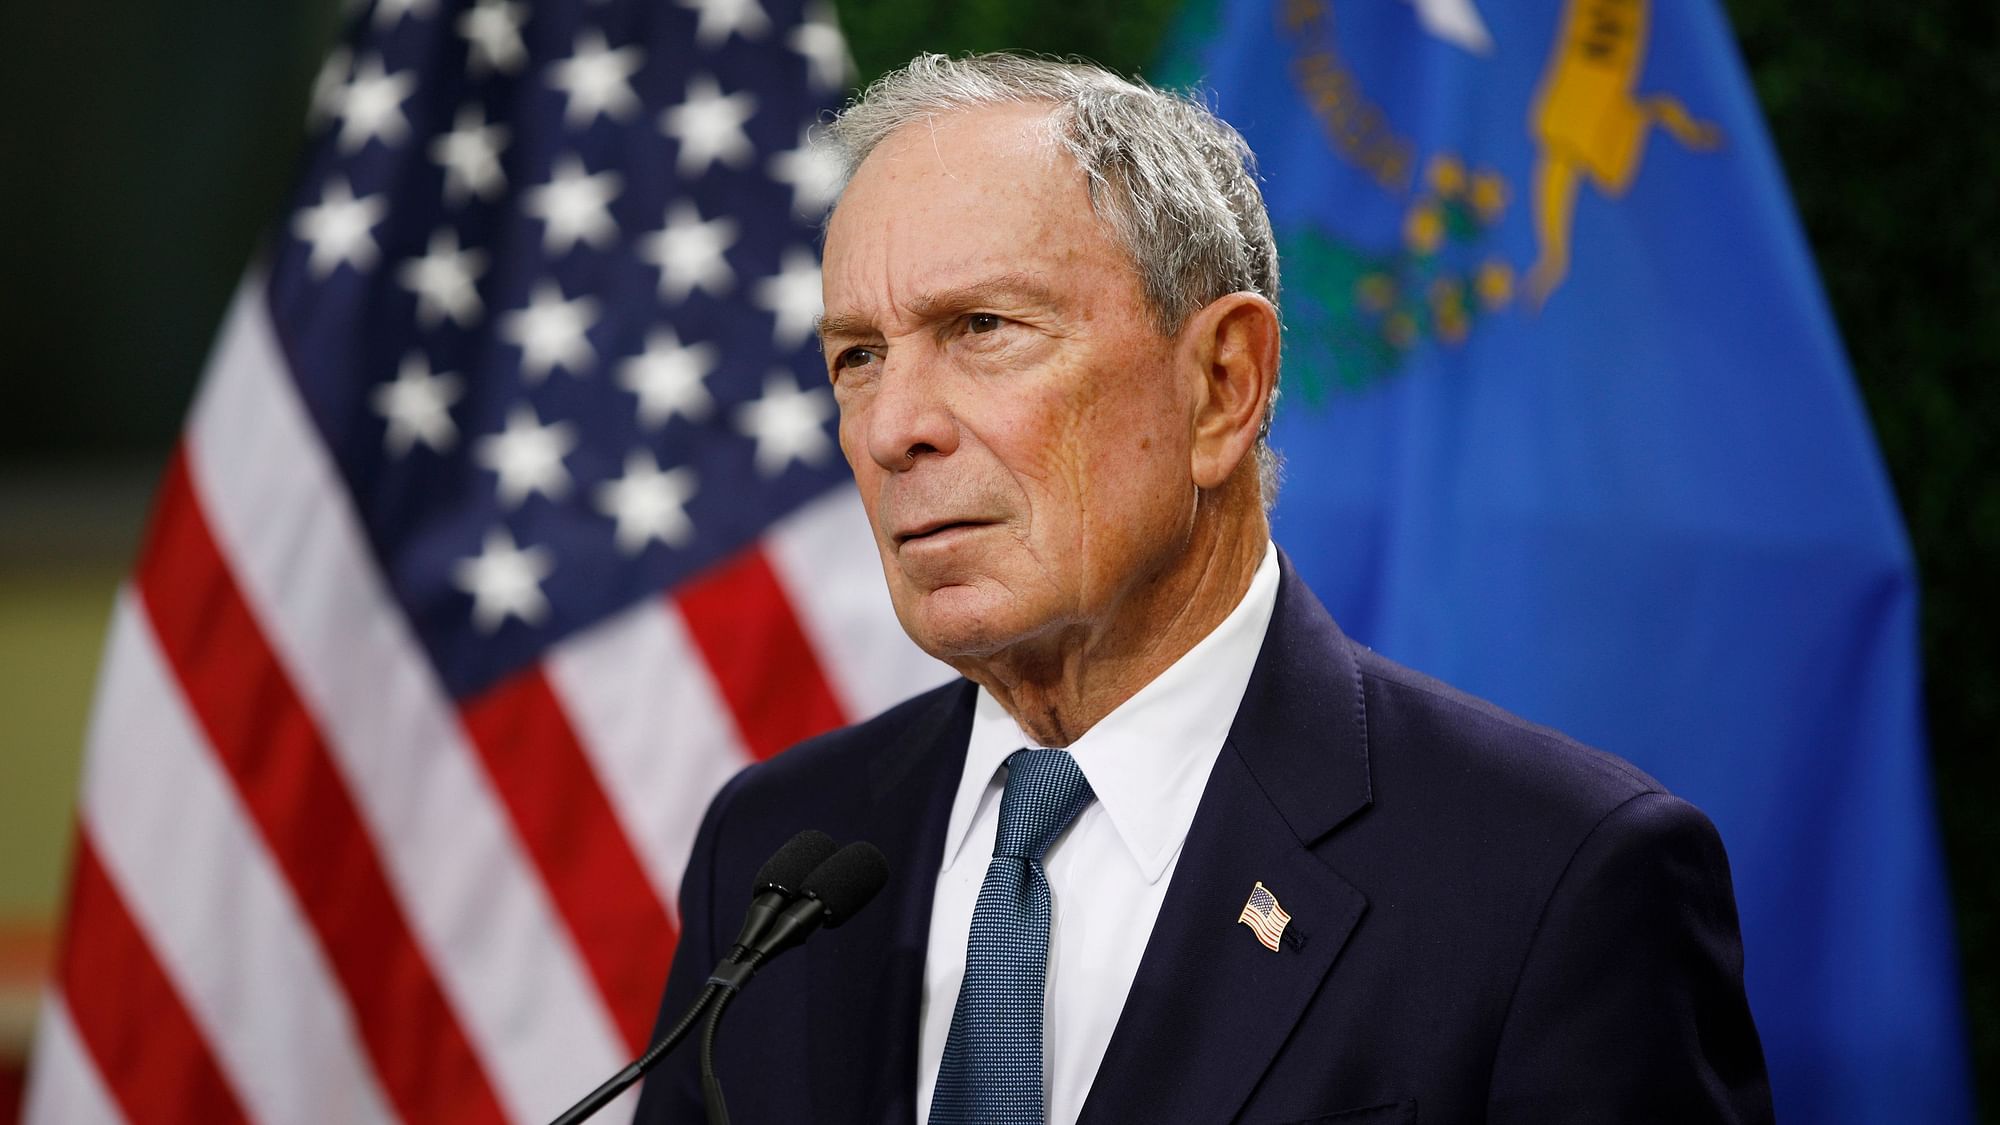 New York billionaire Michael Bloomberg has taken another step toward launching a Democratic bid for president.